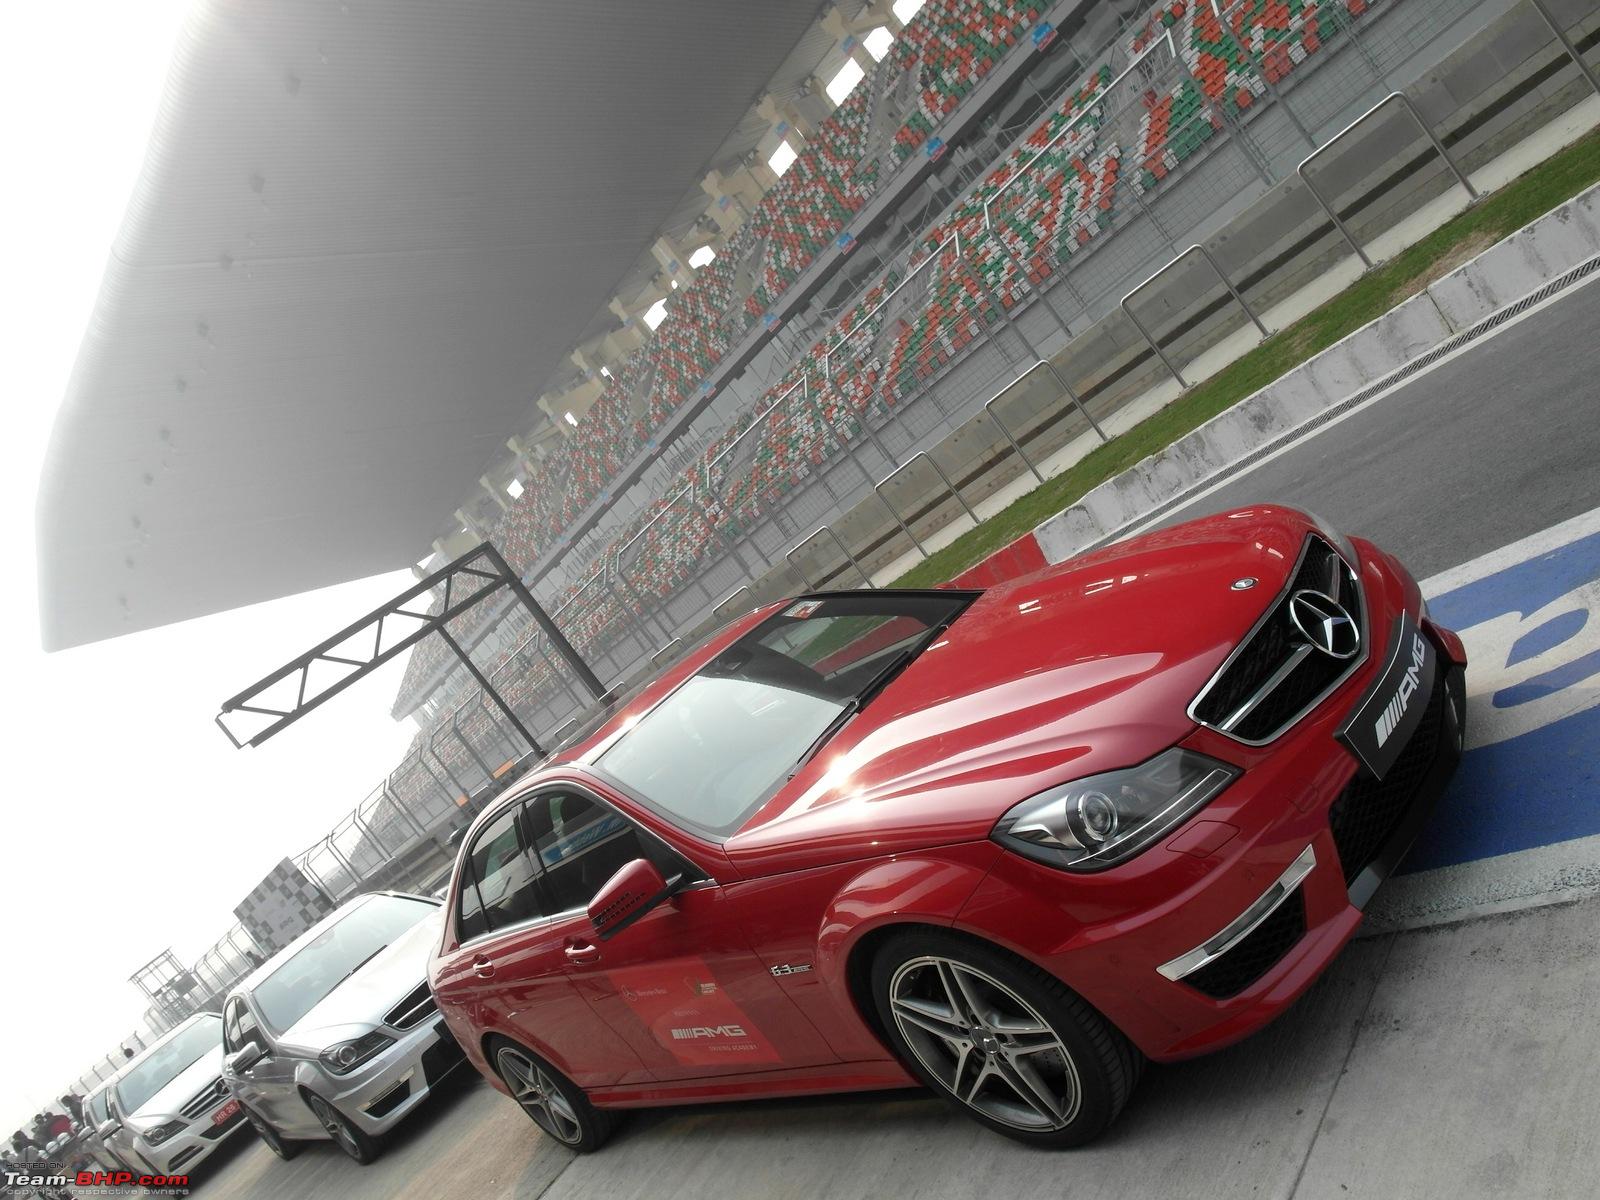 I Drove A C63 Amg At Buddh Mercedes Amg Driving Academy Launched - Team-bhp